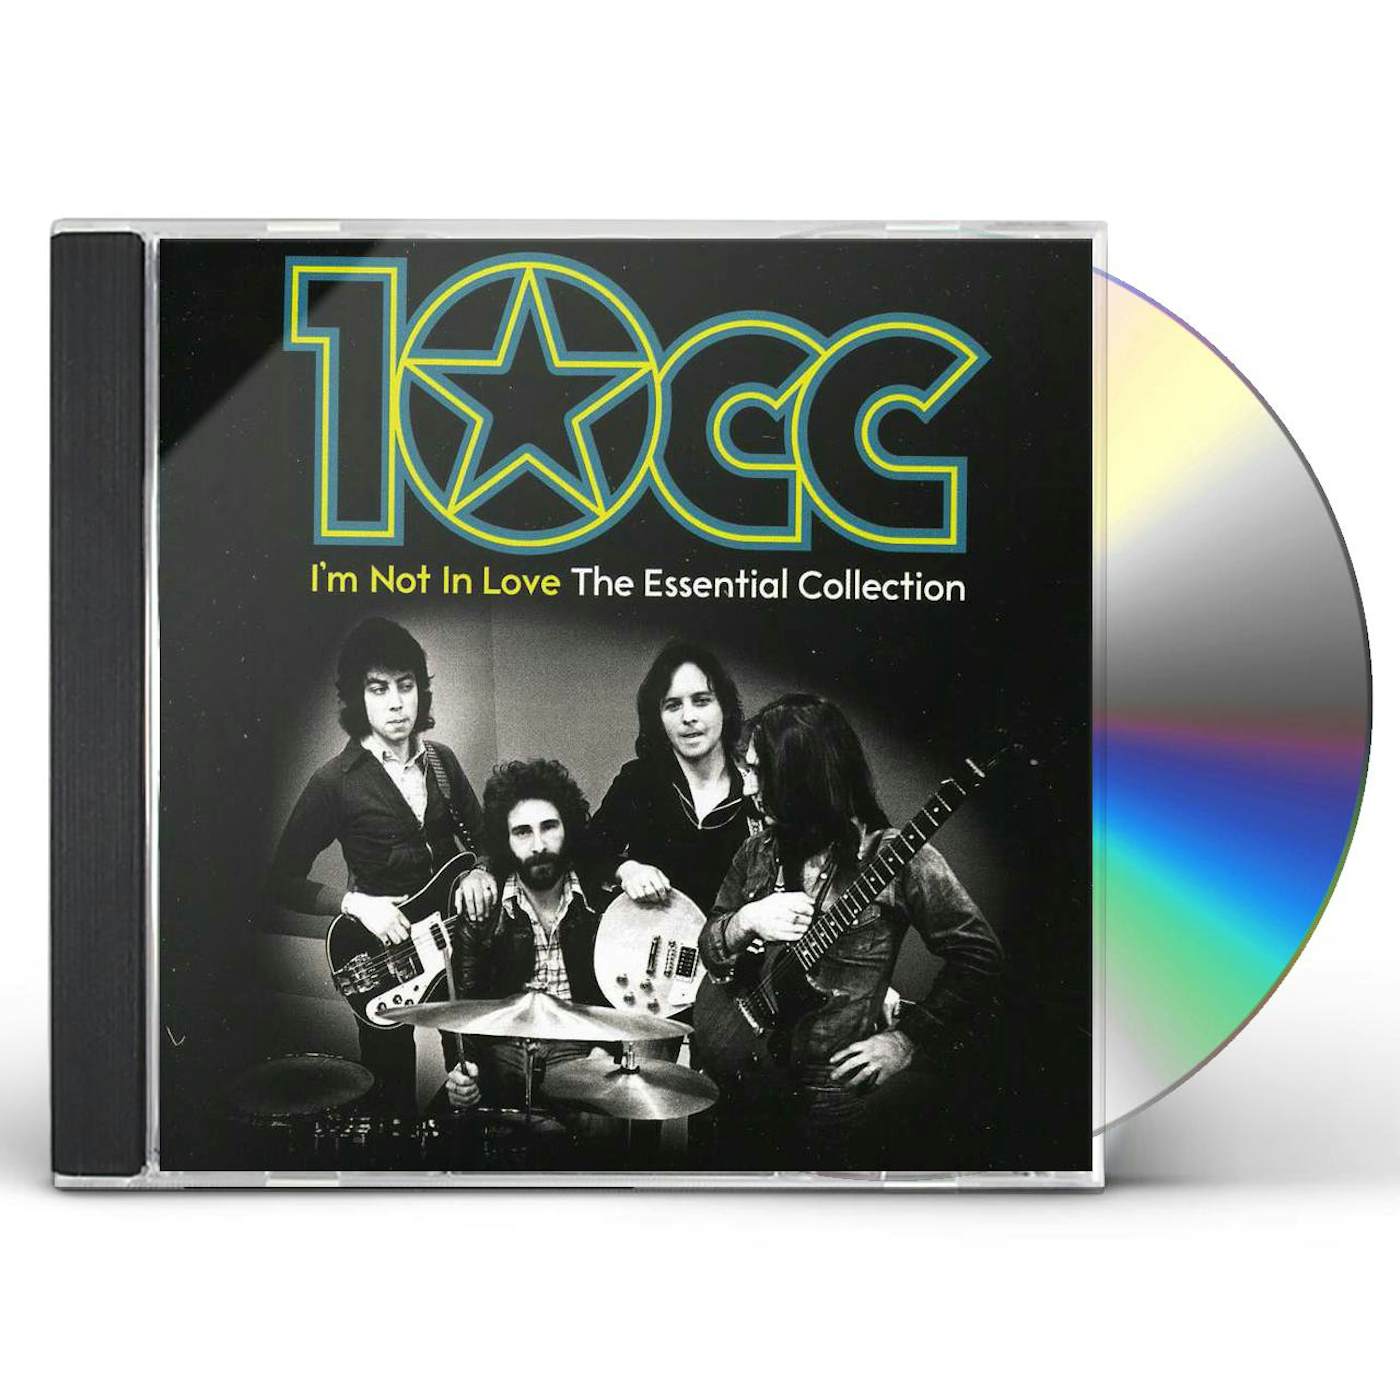 10cc I'M NOT IN LOVE: ESSENTIAL COLLECTION CD